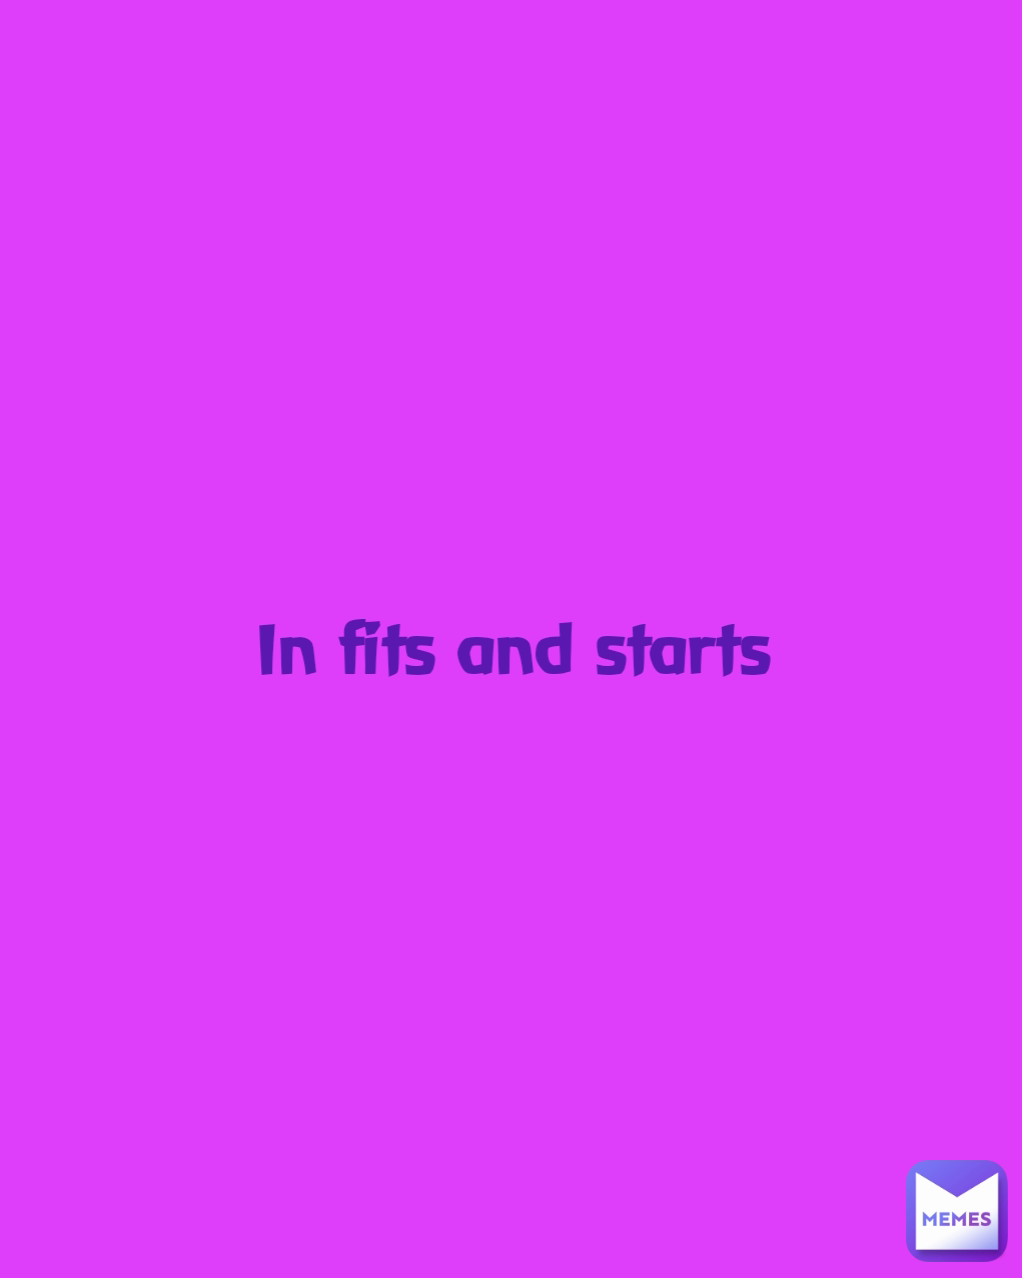 In fits and starts